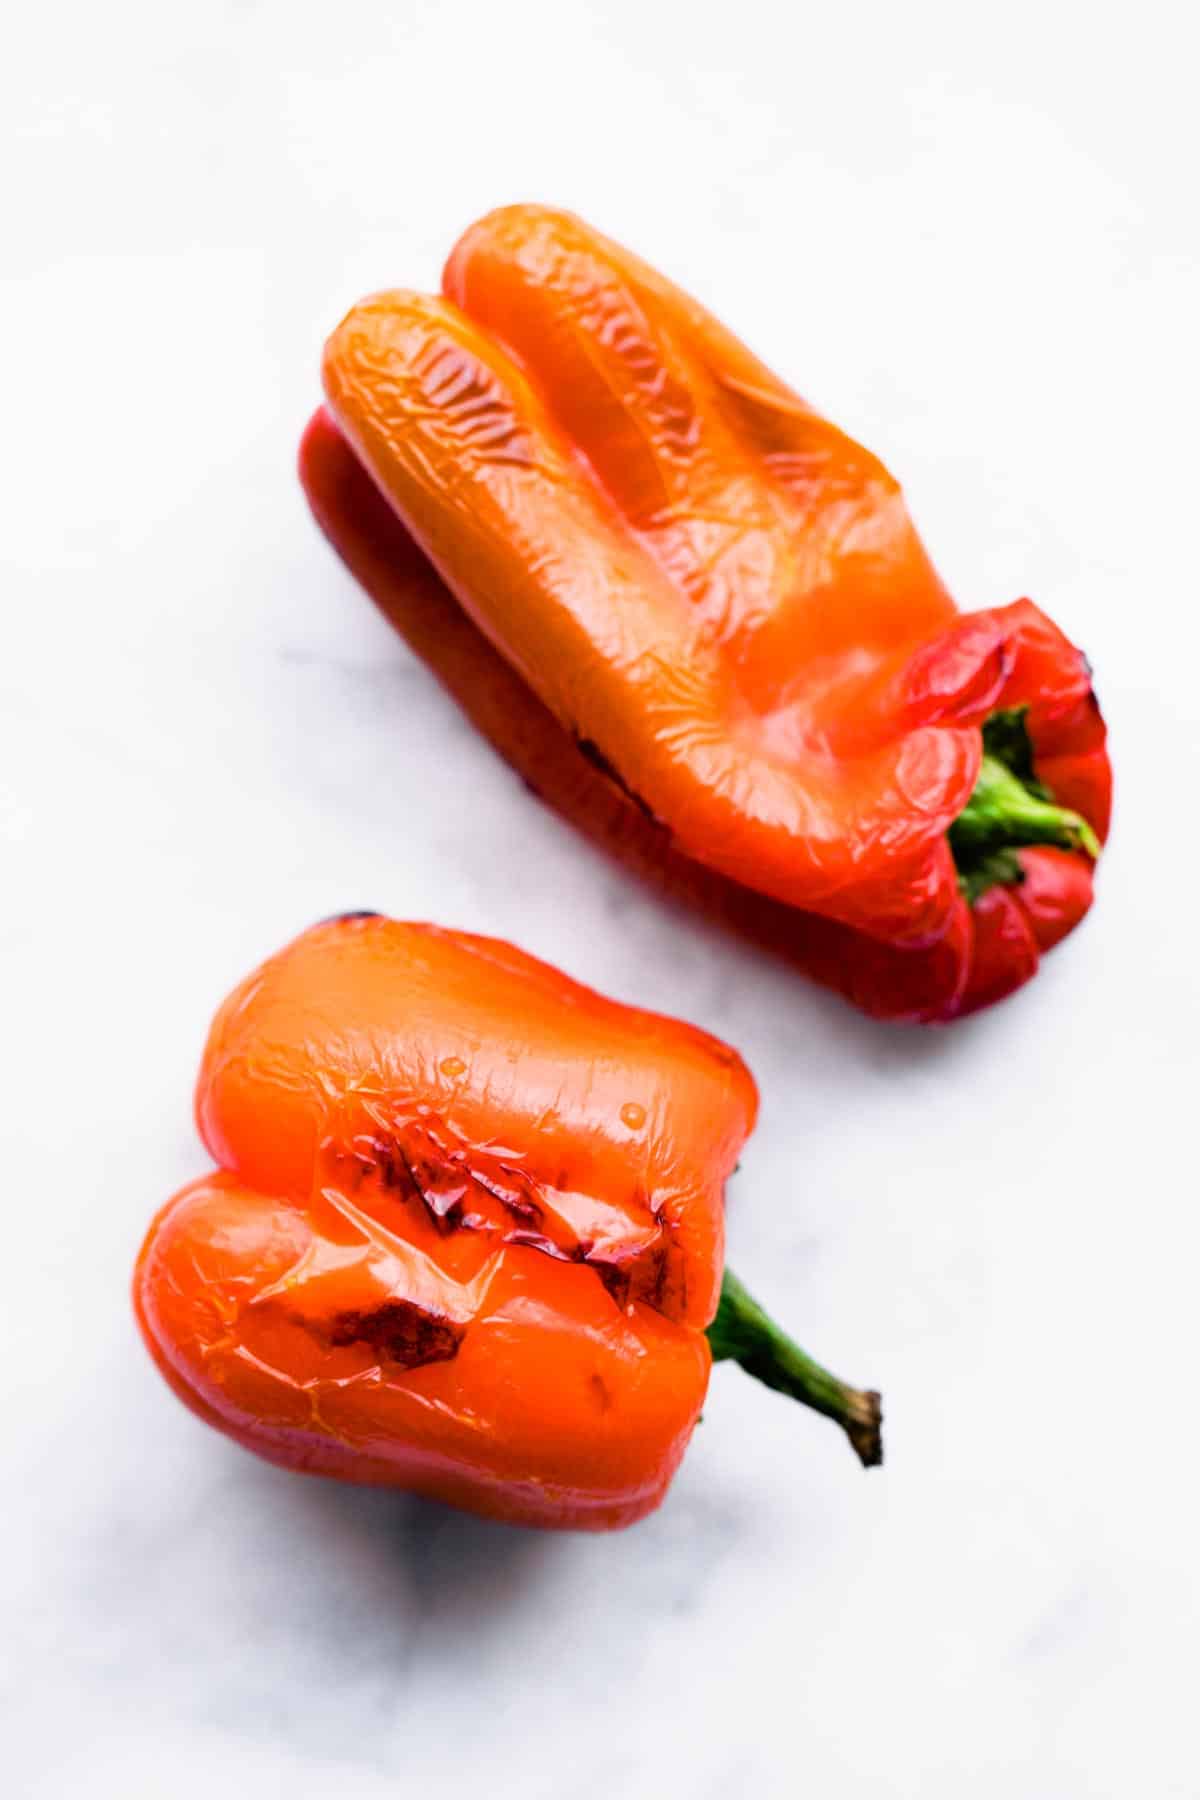 Two roasted red peppers.